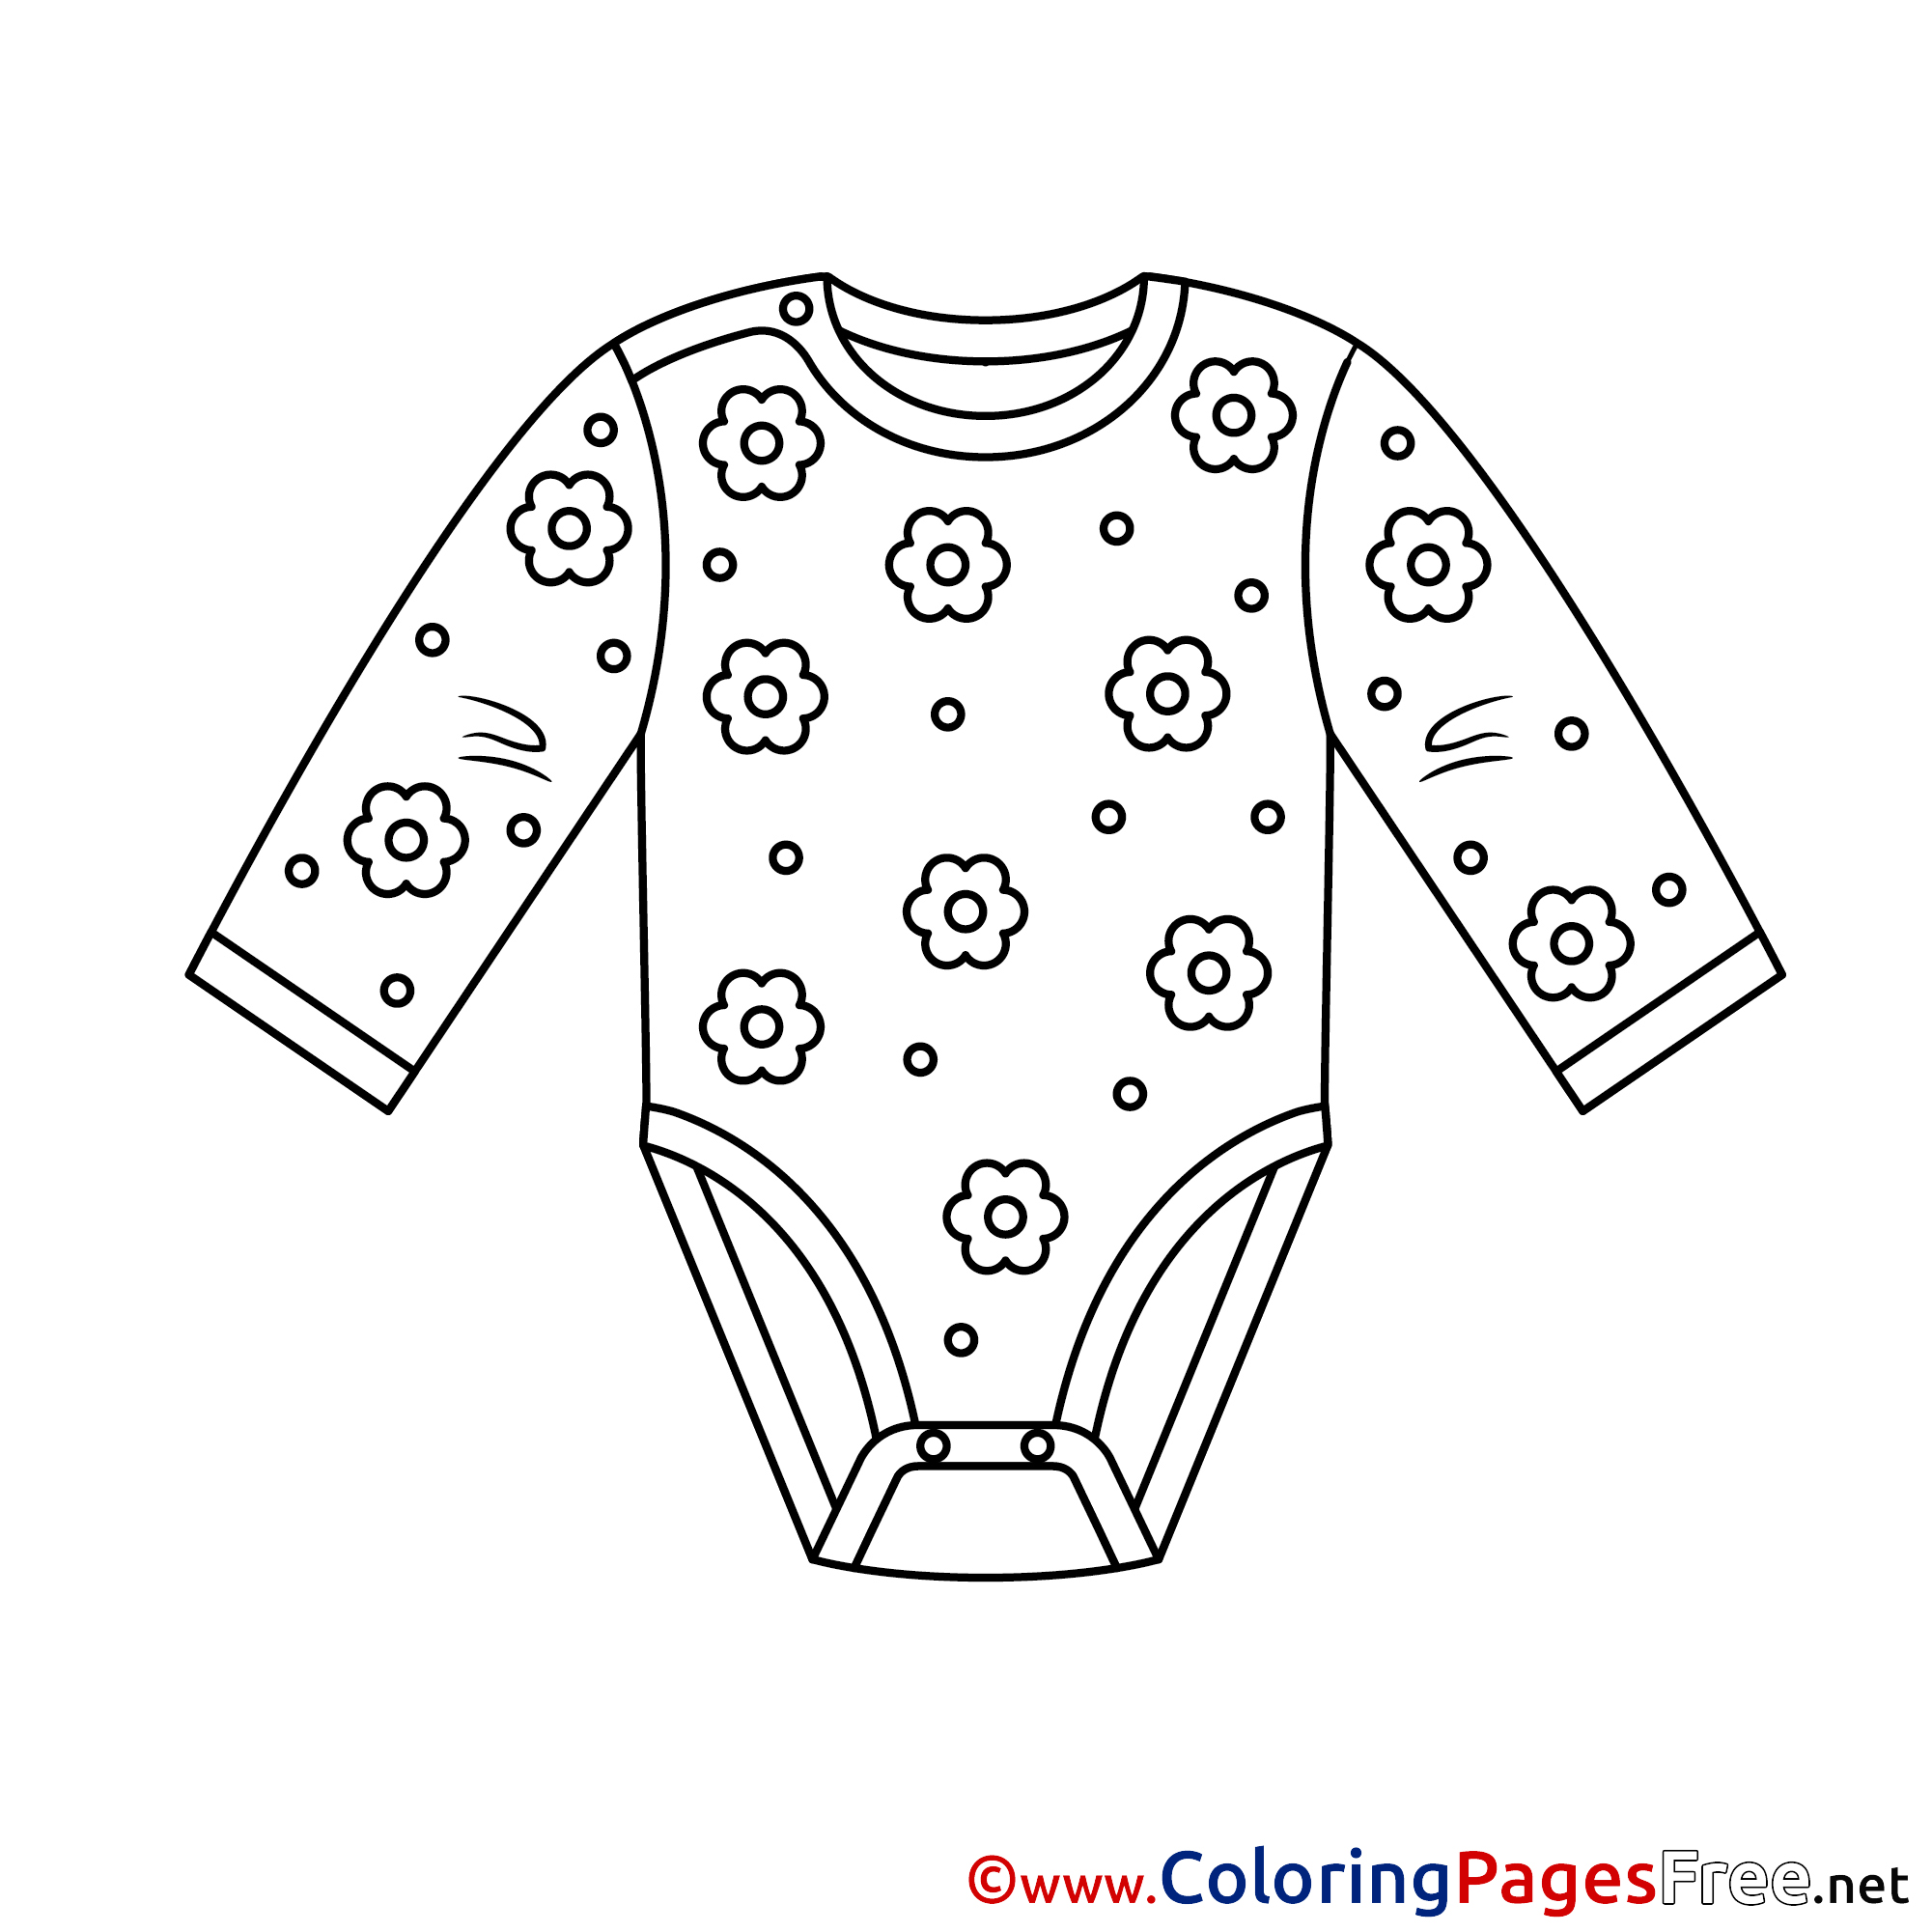 clothes-printable-coloring-pages-for-free